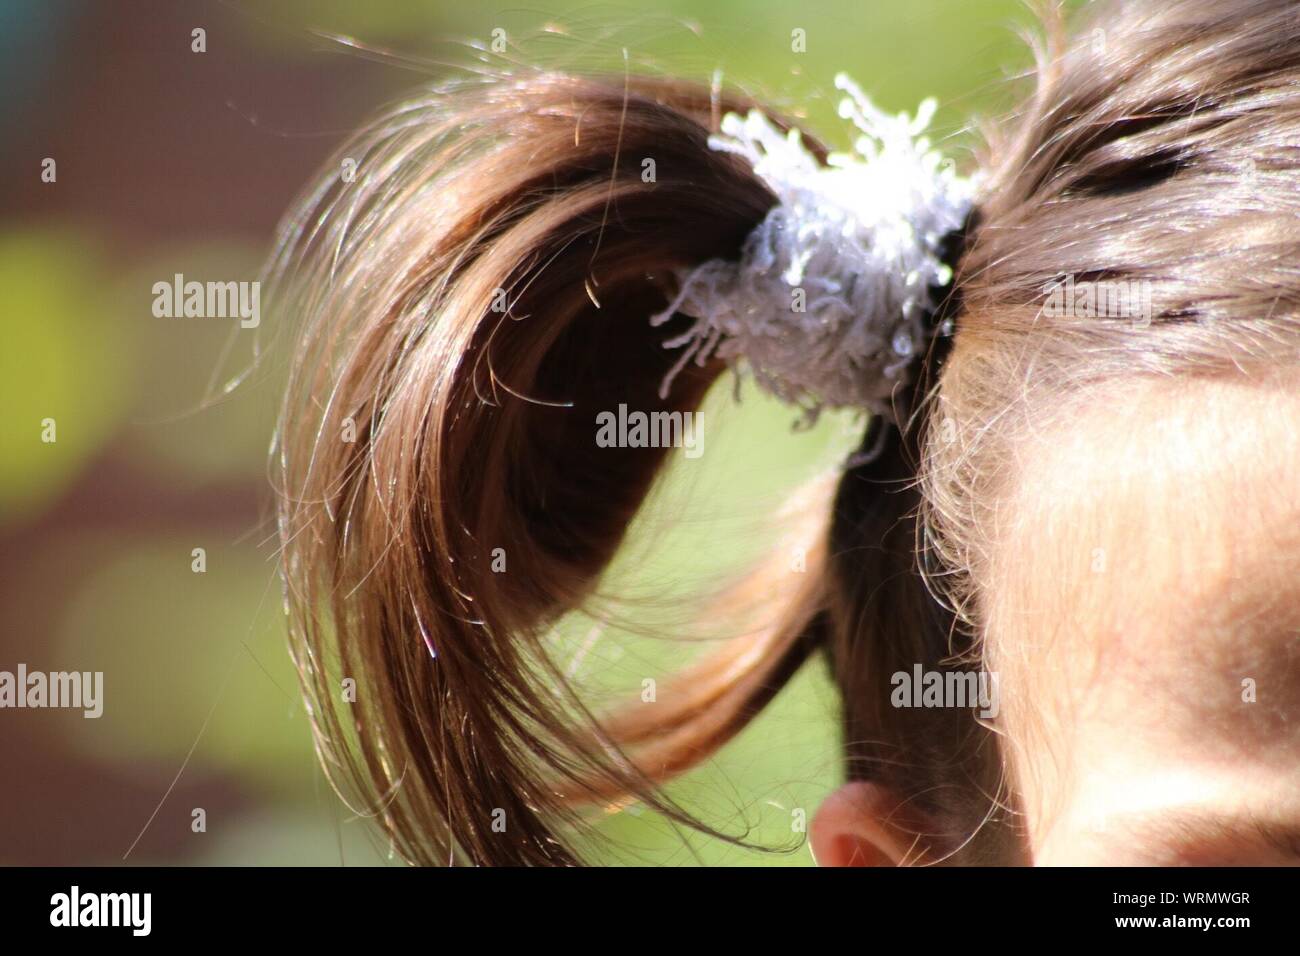 Cropped Image Of Girl With Pigtail Stock Photo